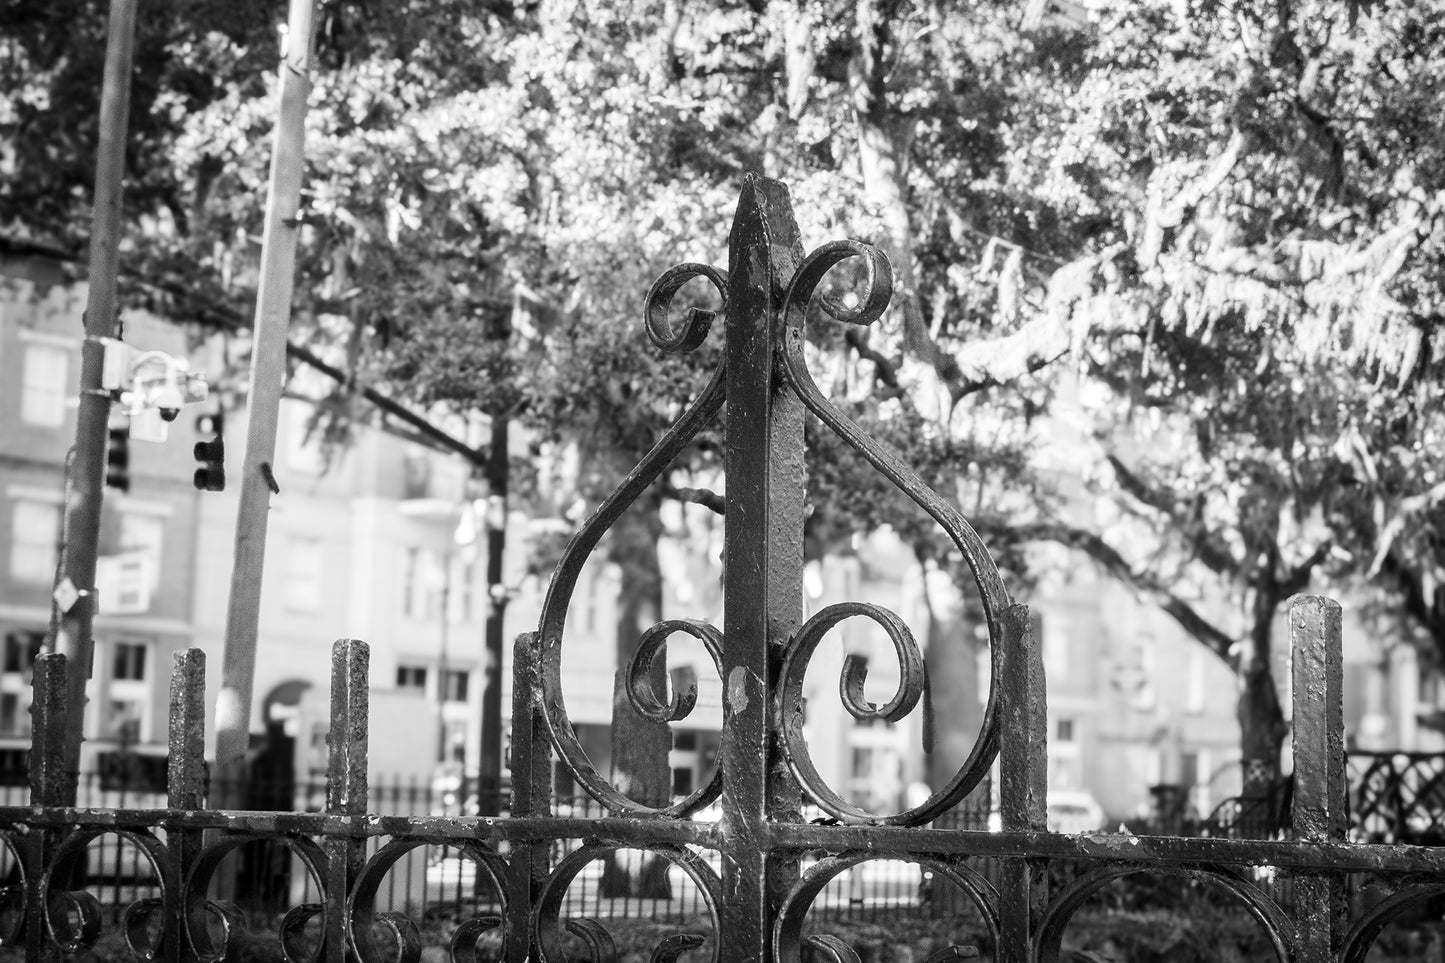 Architectural / Industrial / Cityscape Abstract Decor Old Wrought Iron Fence Gate Savannah Ga 2 Loose Wall Art Print 